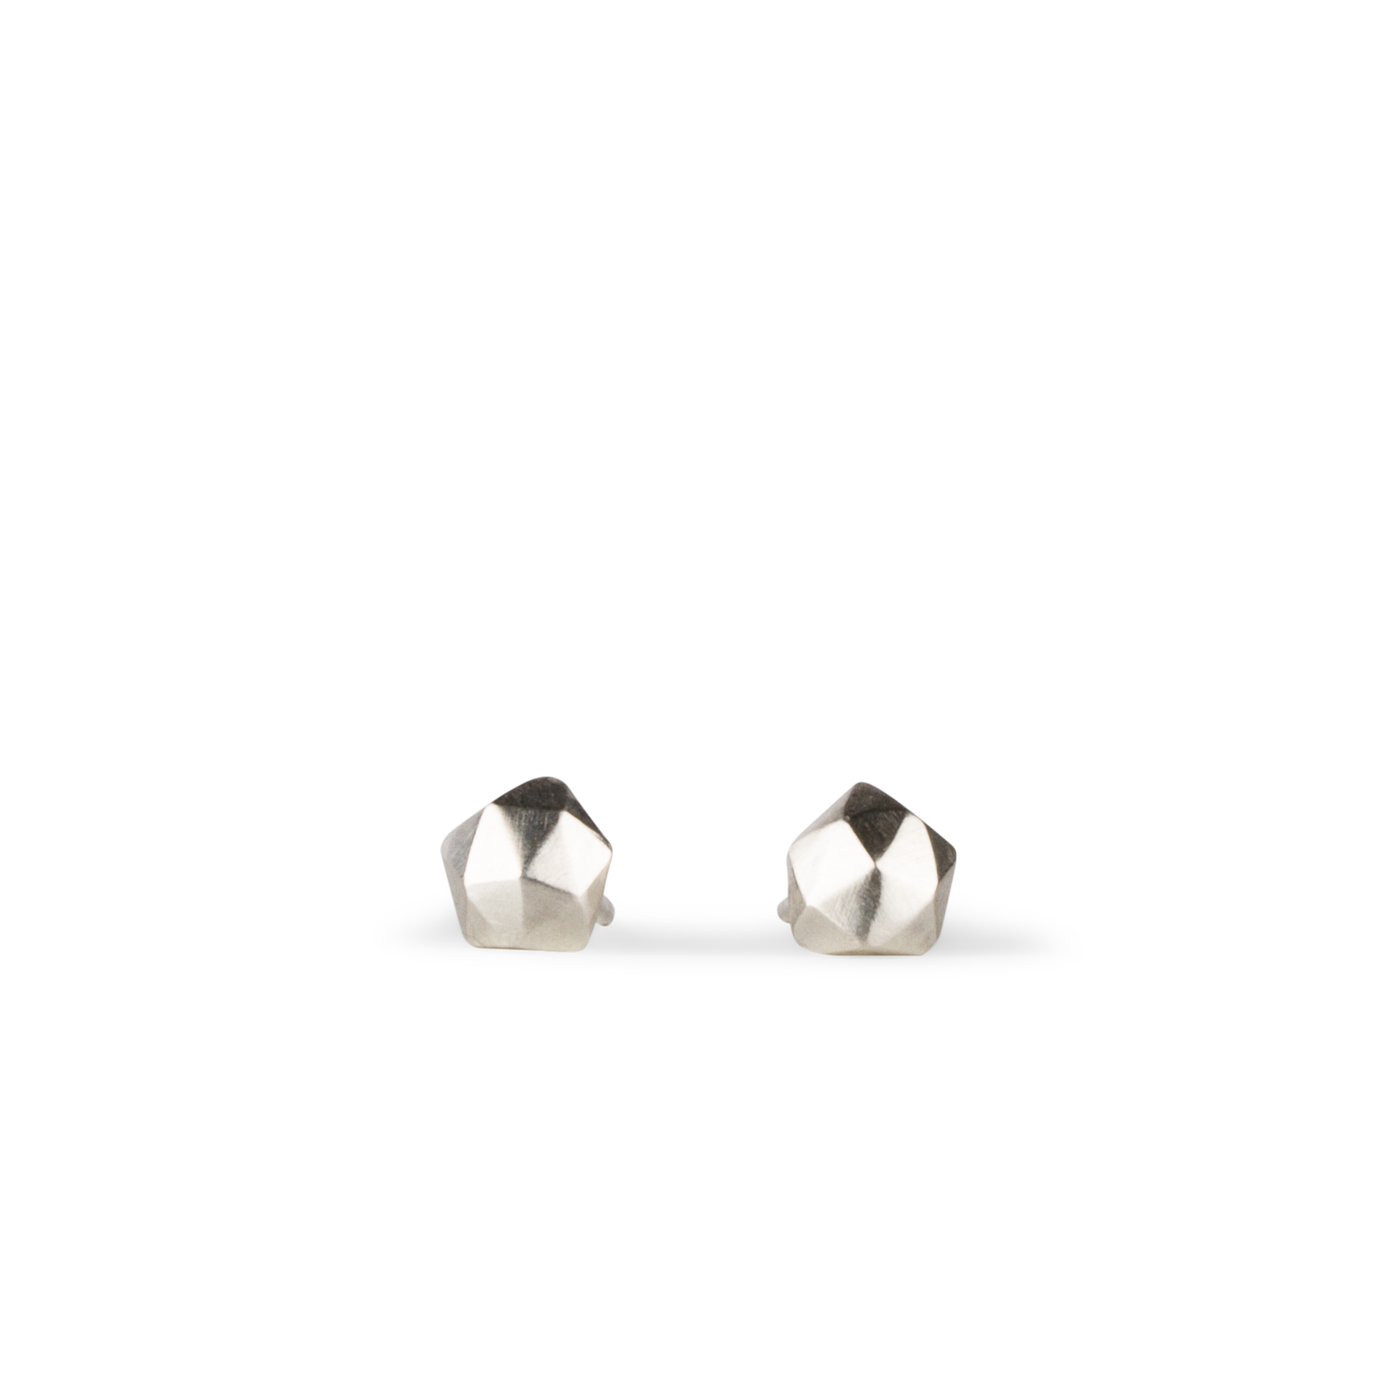  sterling silver micro size geometric faceted stud earrings by Corey Egan on a white background